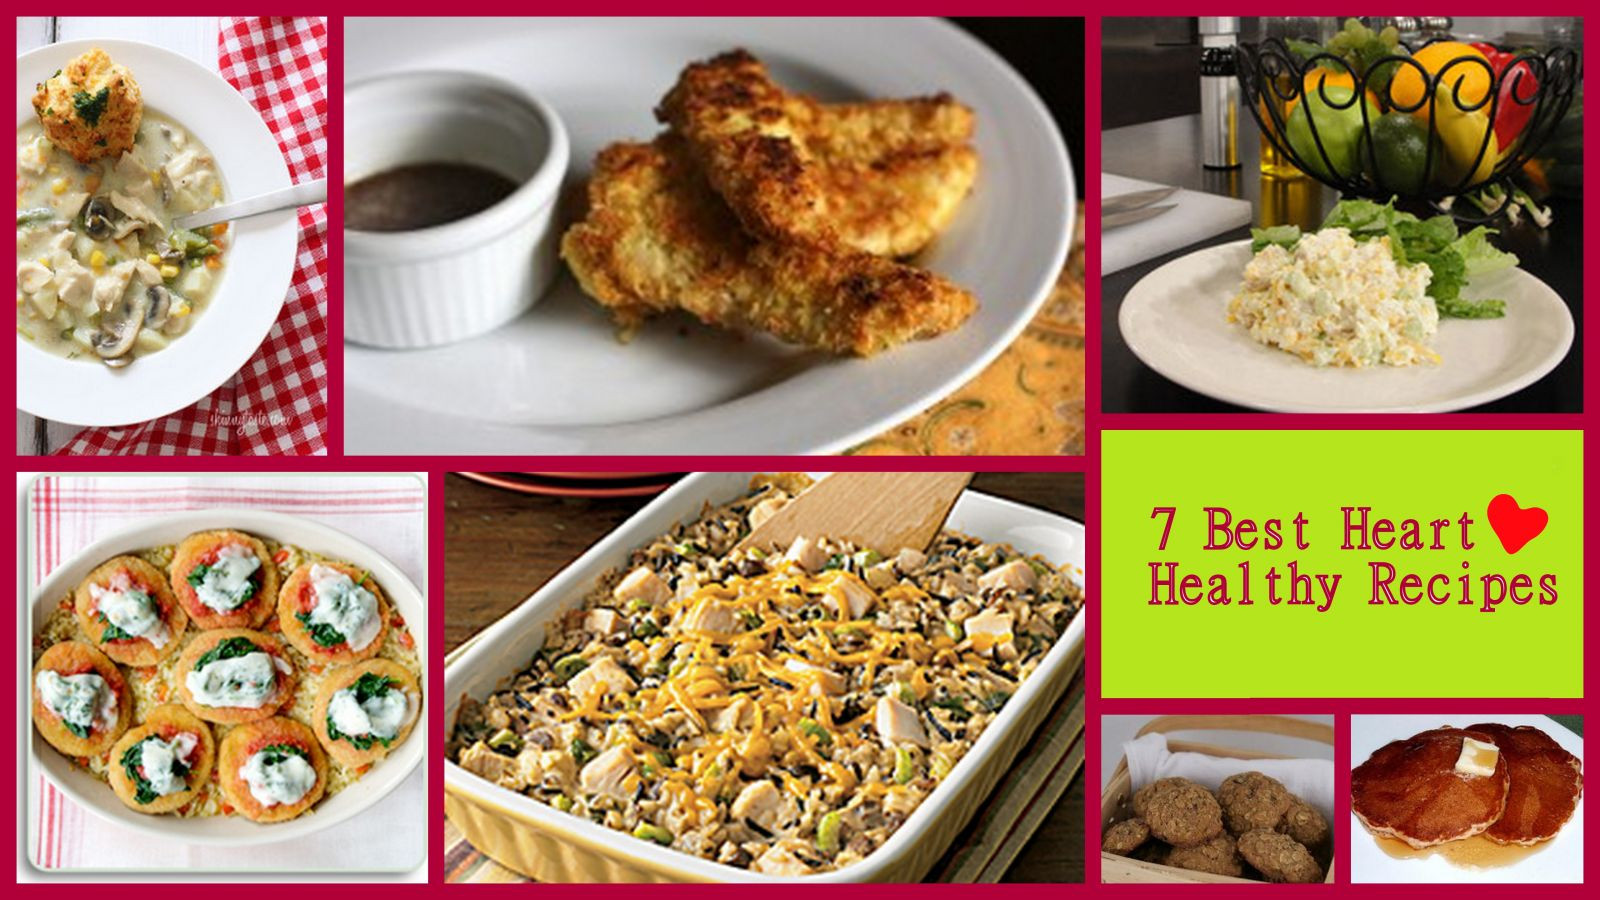 Heart Healthy Diets Recipes
 7 Best Heart Healthy Recipes